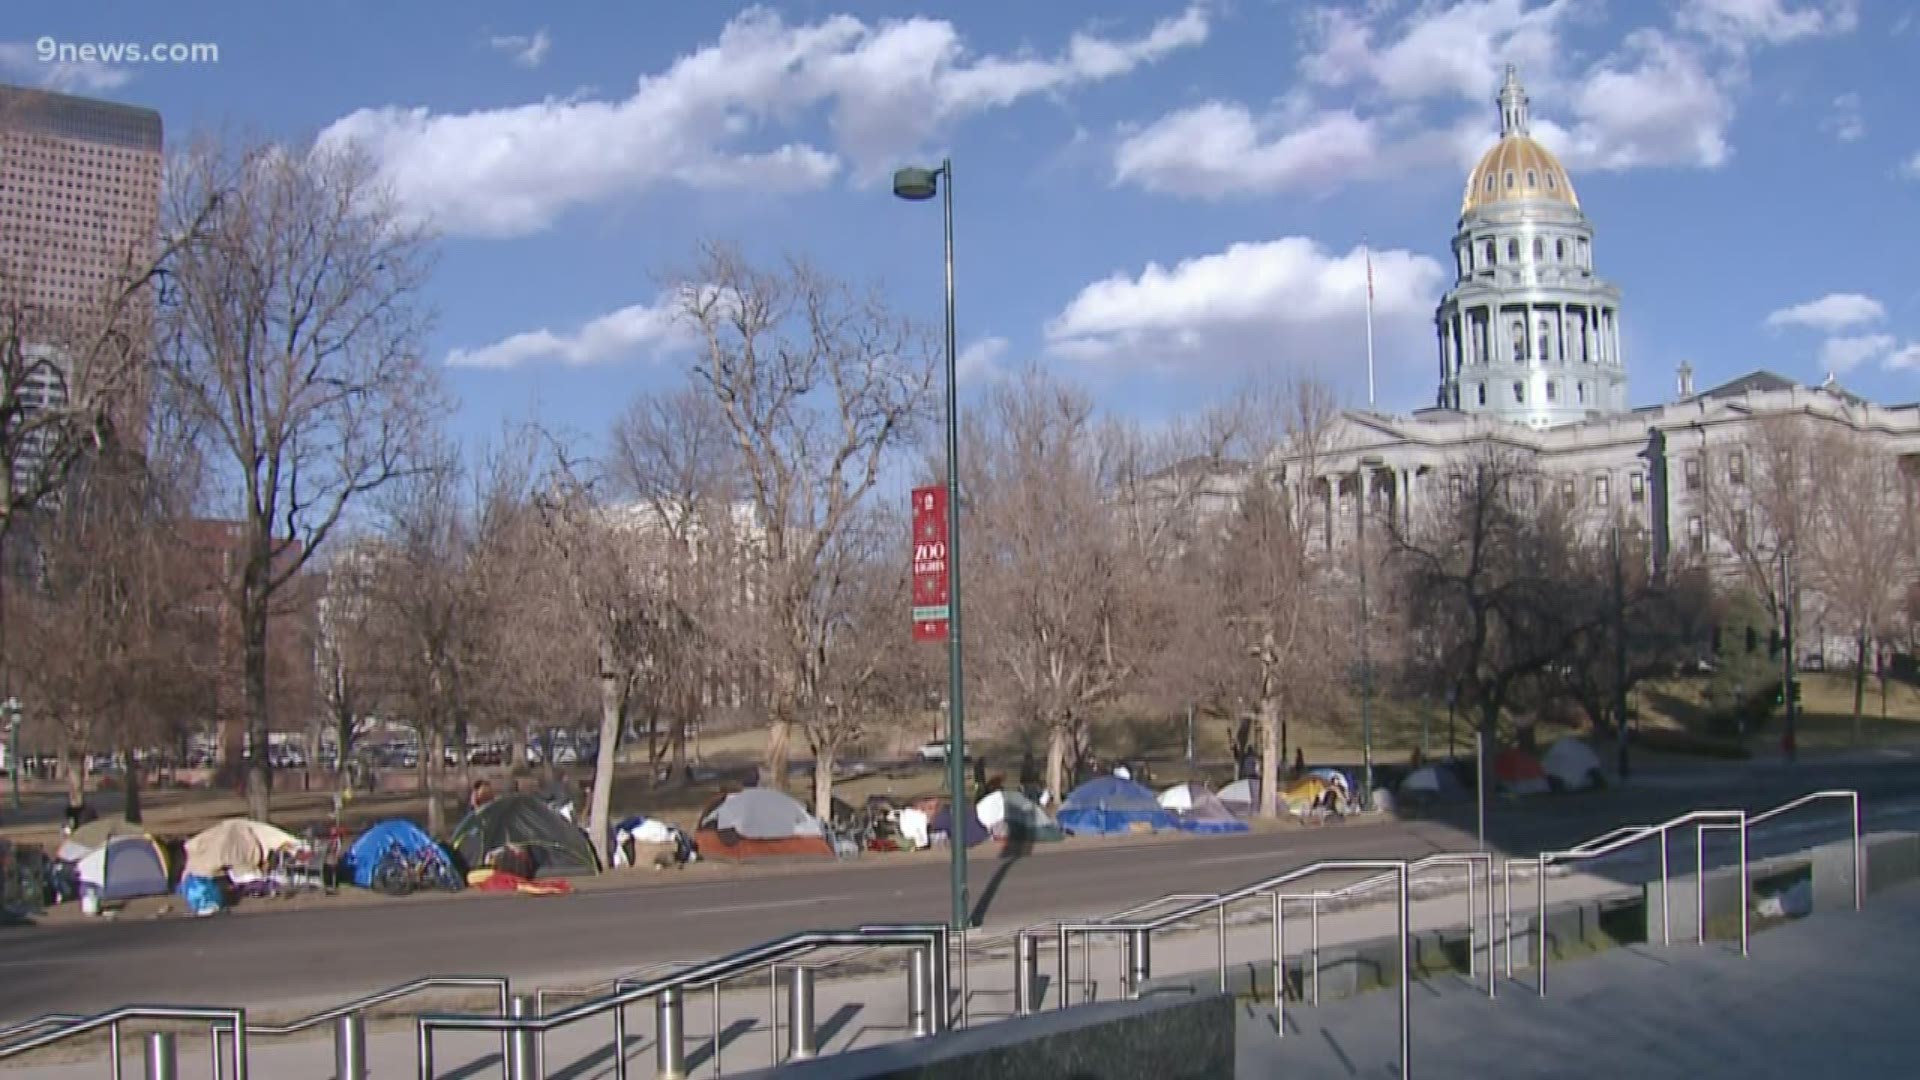 Denver police said the camping ban enforcement could resume by the end of the week. The ban requires officers to try and connect people with resources upon contact.